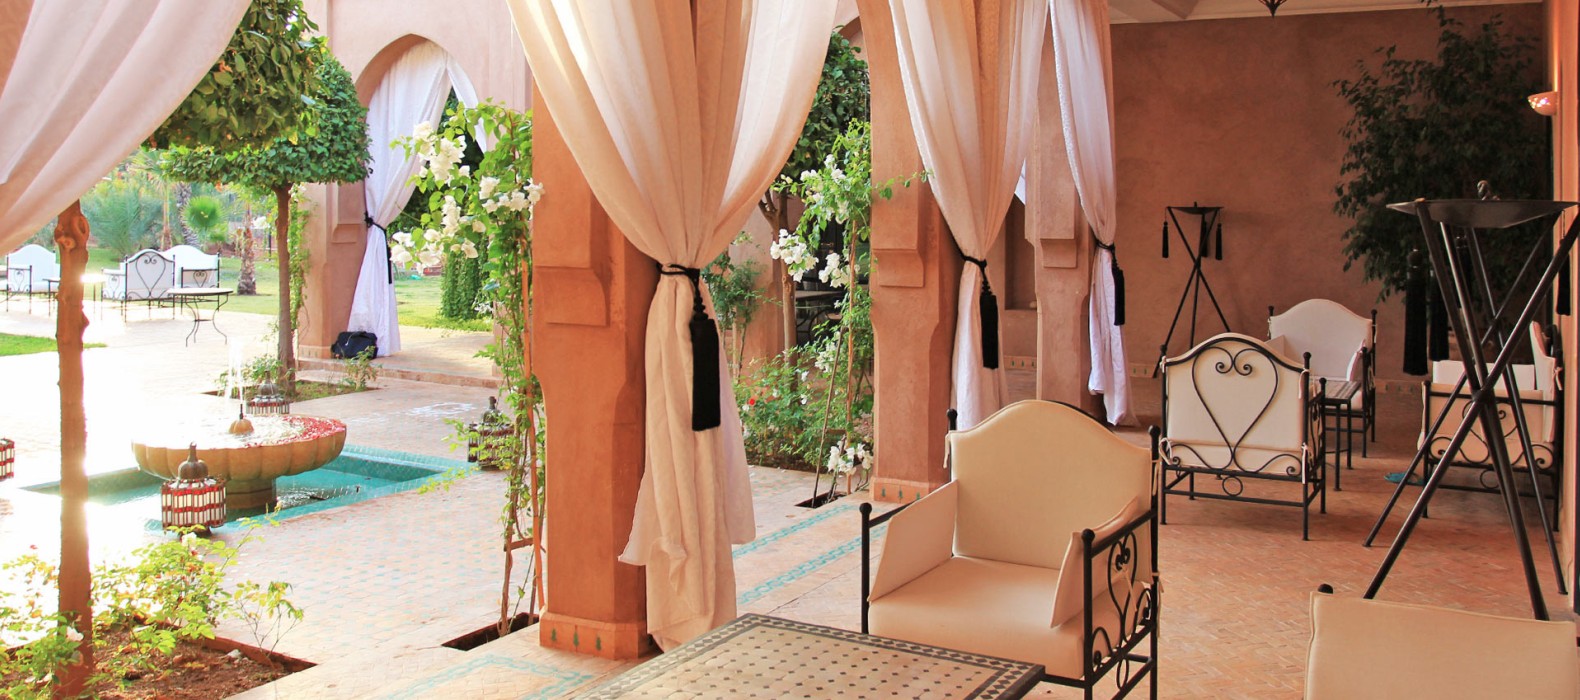 Chill area view of Villa Mansour in Marrakech